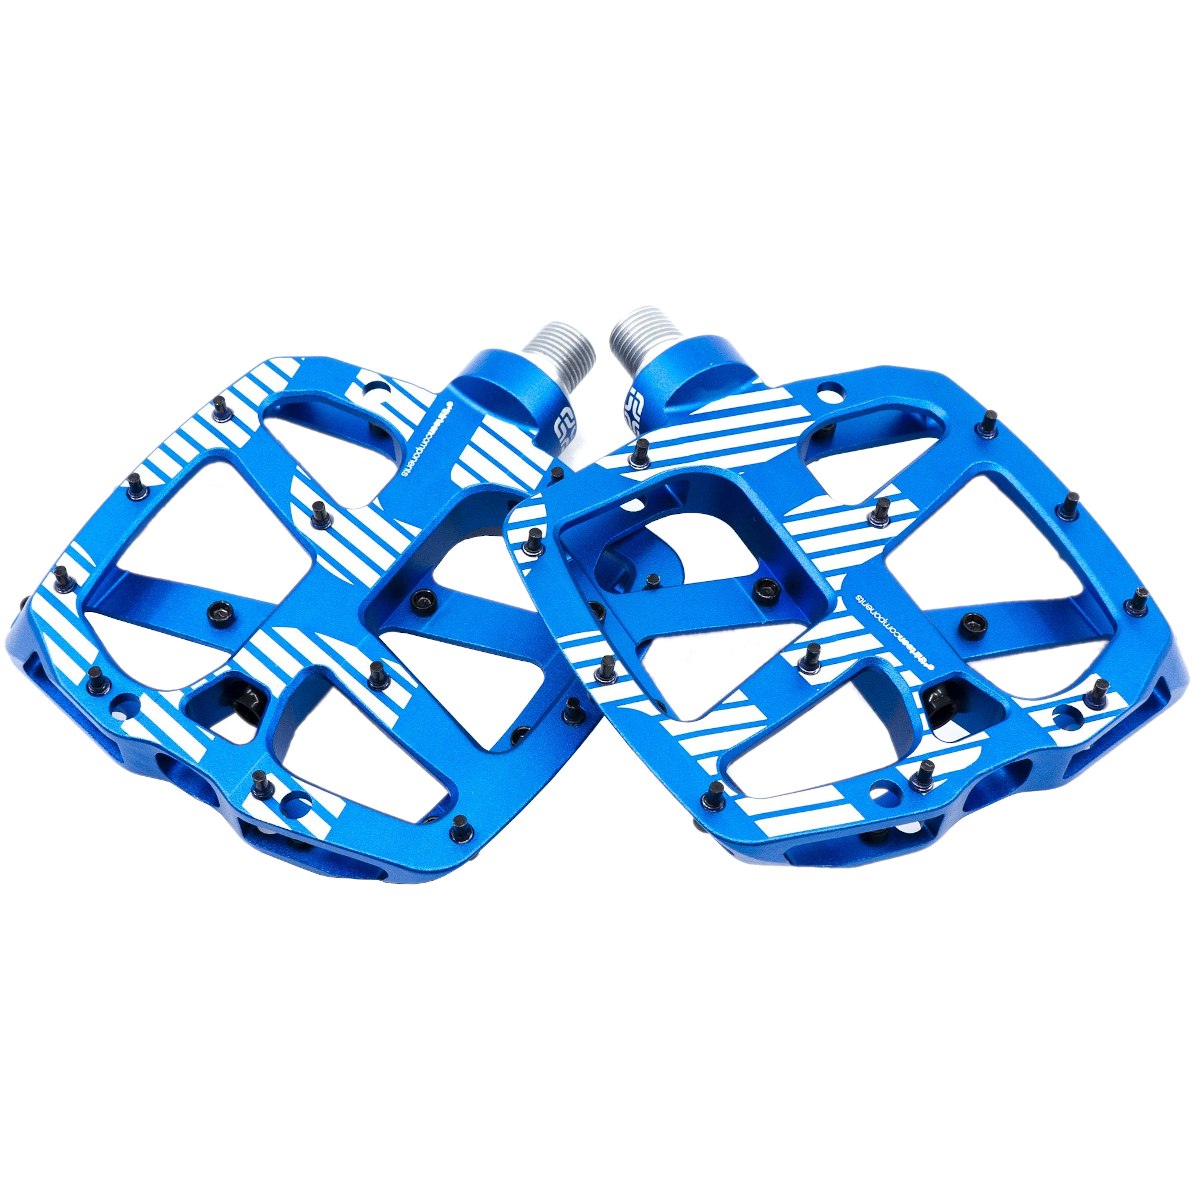 Picture of e*thirteen Plus Flat Pedals - blue